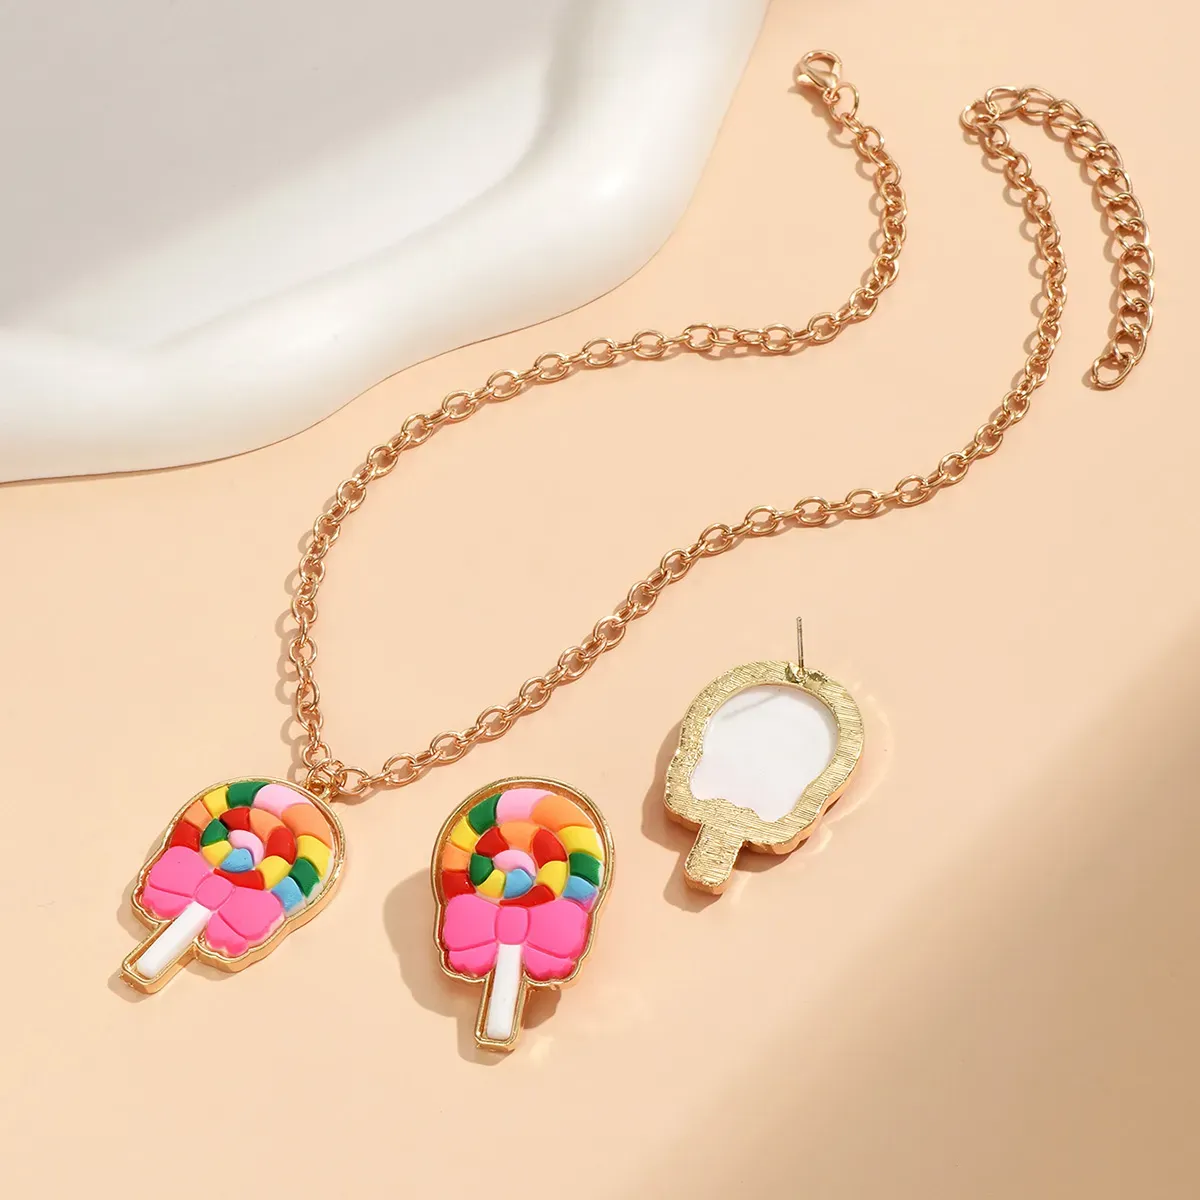 earring european and american hotselling candycolored lollipop earrings necklace jewelry set sweet and cute girly style collarbone chain